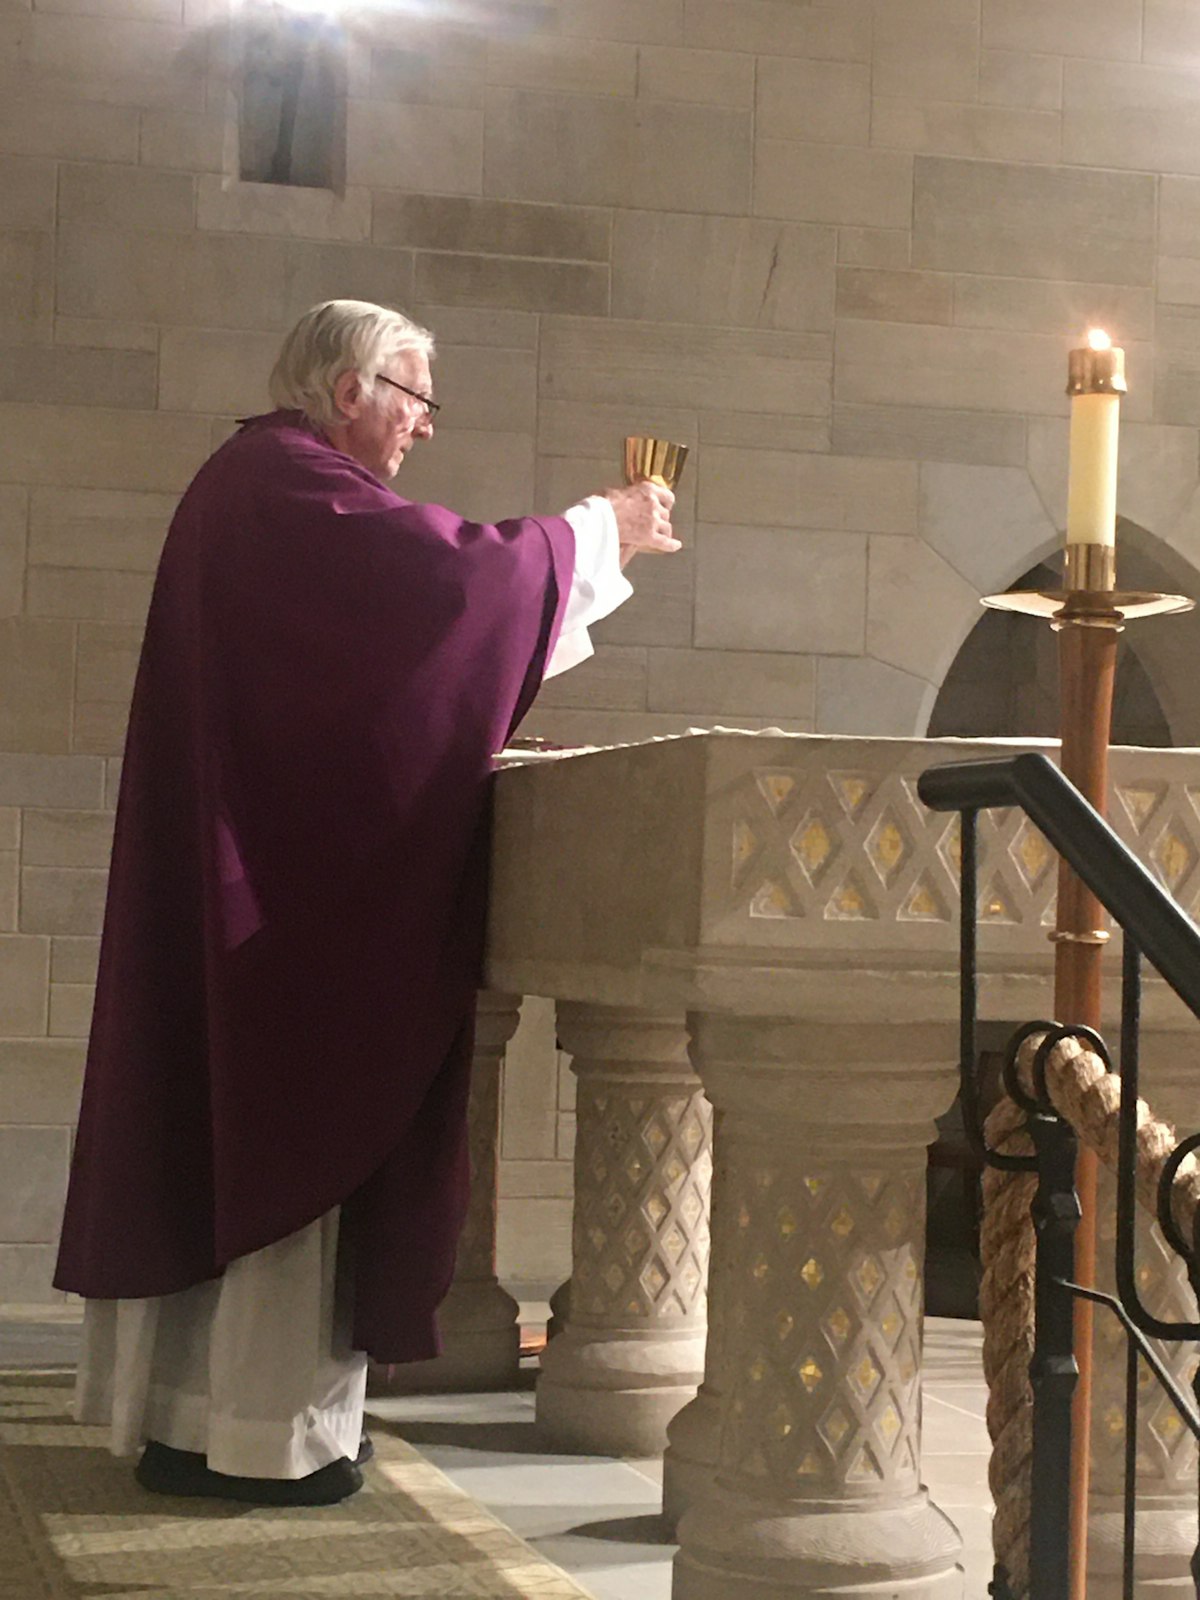 Fr. Szewczyk elevates the Eucharist while celebrating Mass in the Stone Chapel of St. Hugo of the Hills Parish in Bloomfield Hills.